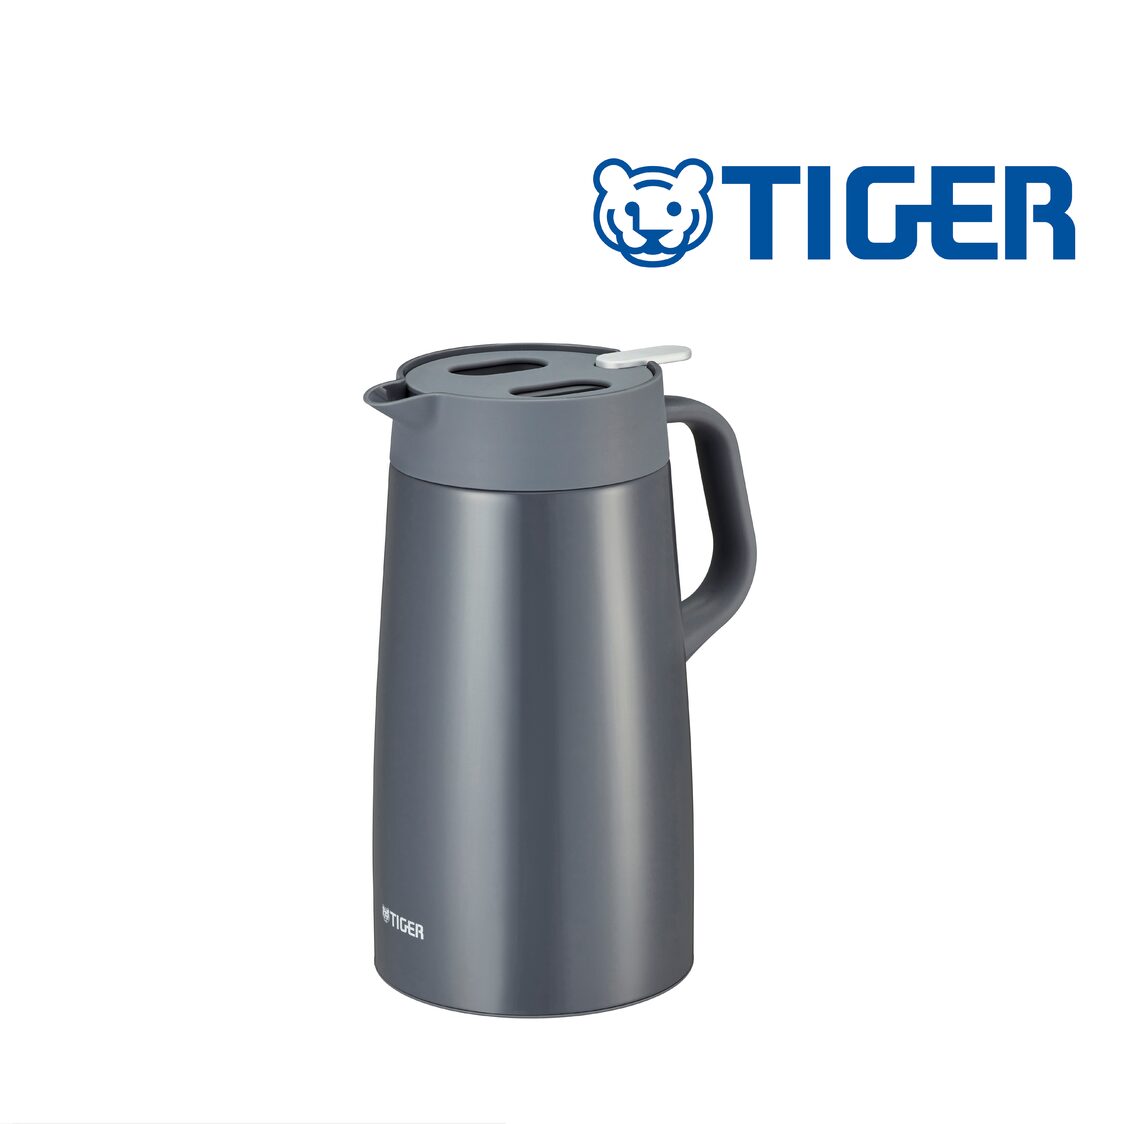 TIGER 16L Double Stainless Steel Handy Jug - Dark Grey PWO-A160 HD